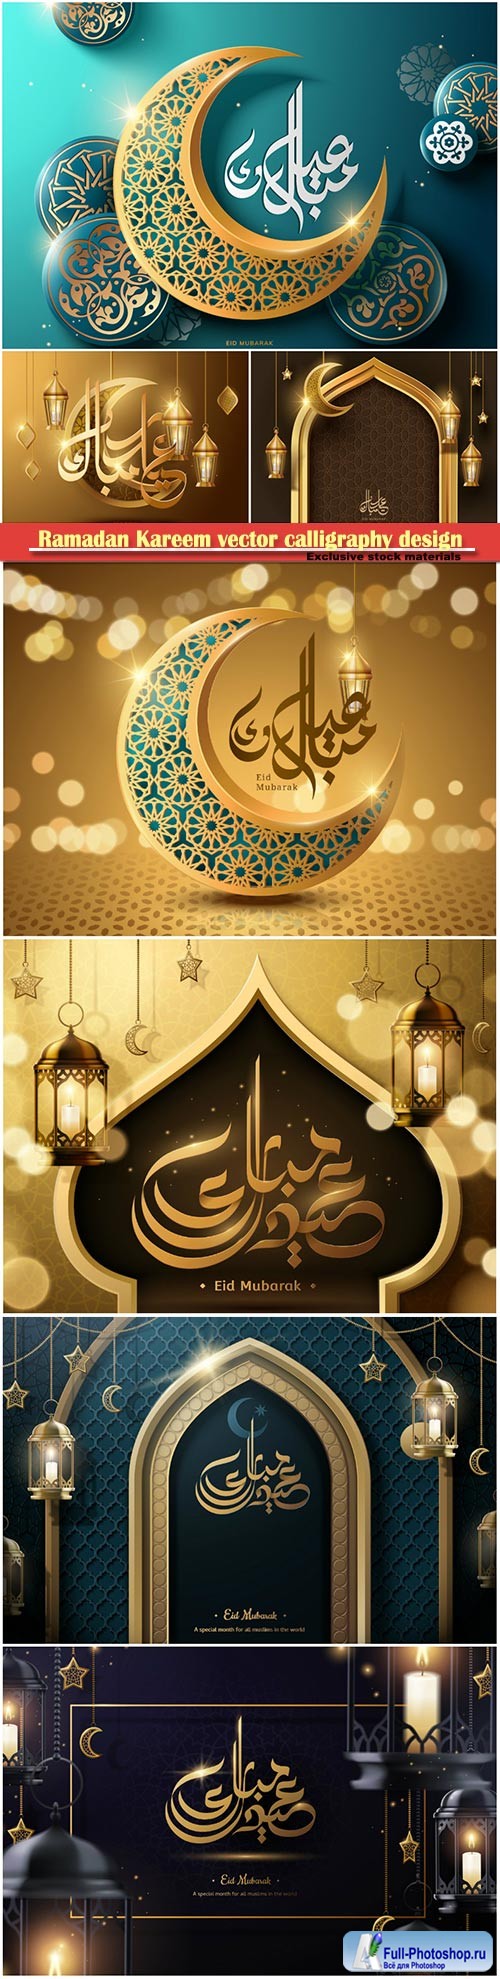 Ramadan Kareem vector calligraphy design with decorative floral pattern, mosque silhouette, crescent and glittering islamic background # 50